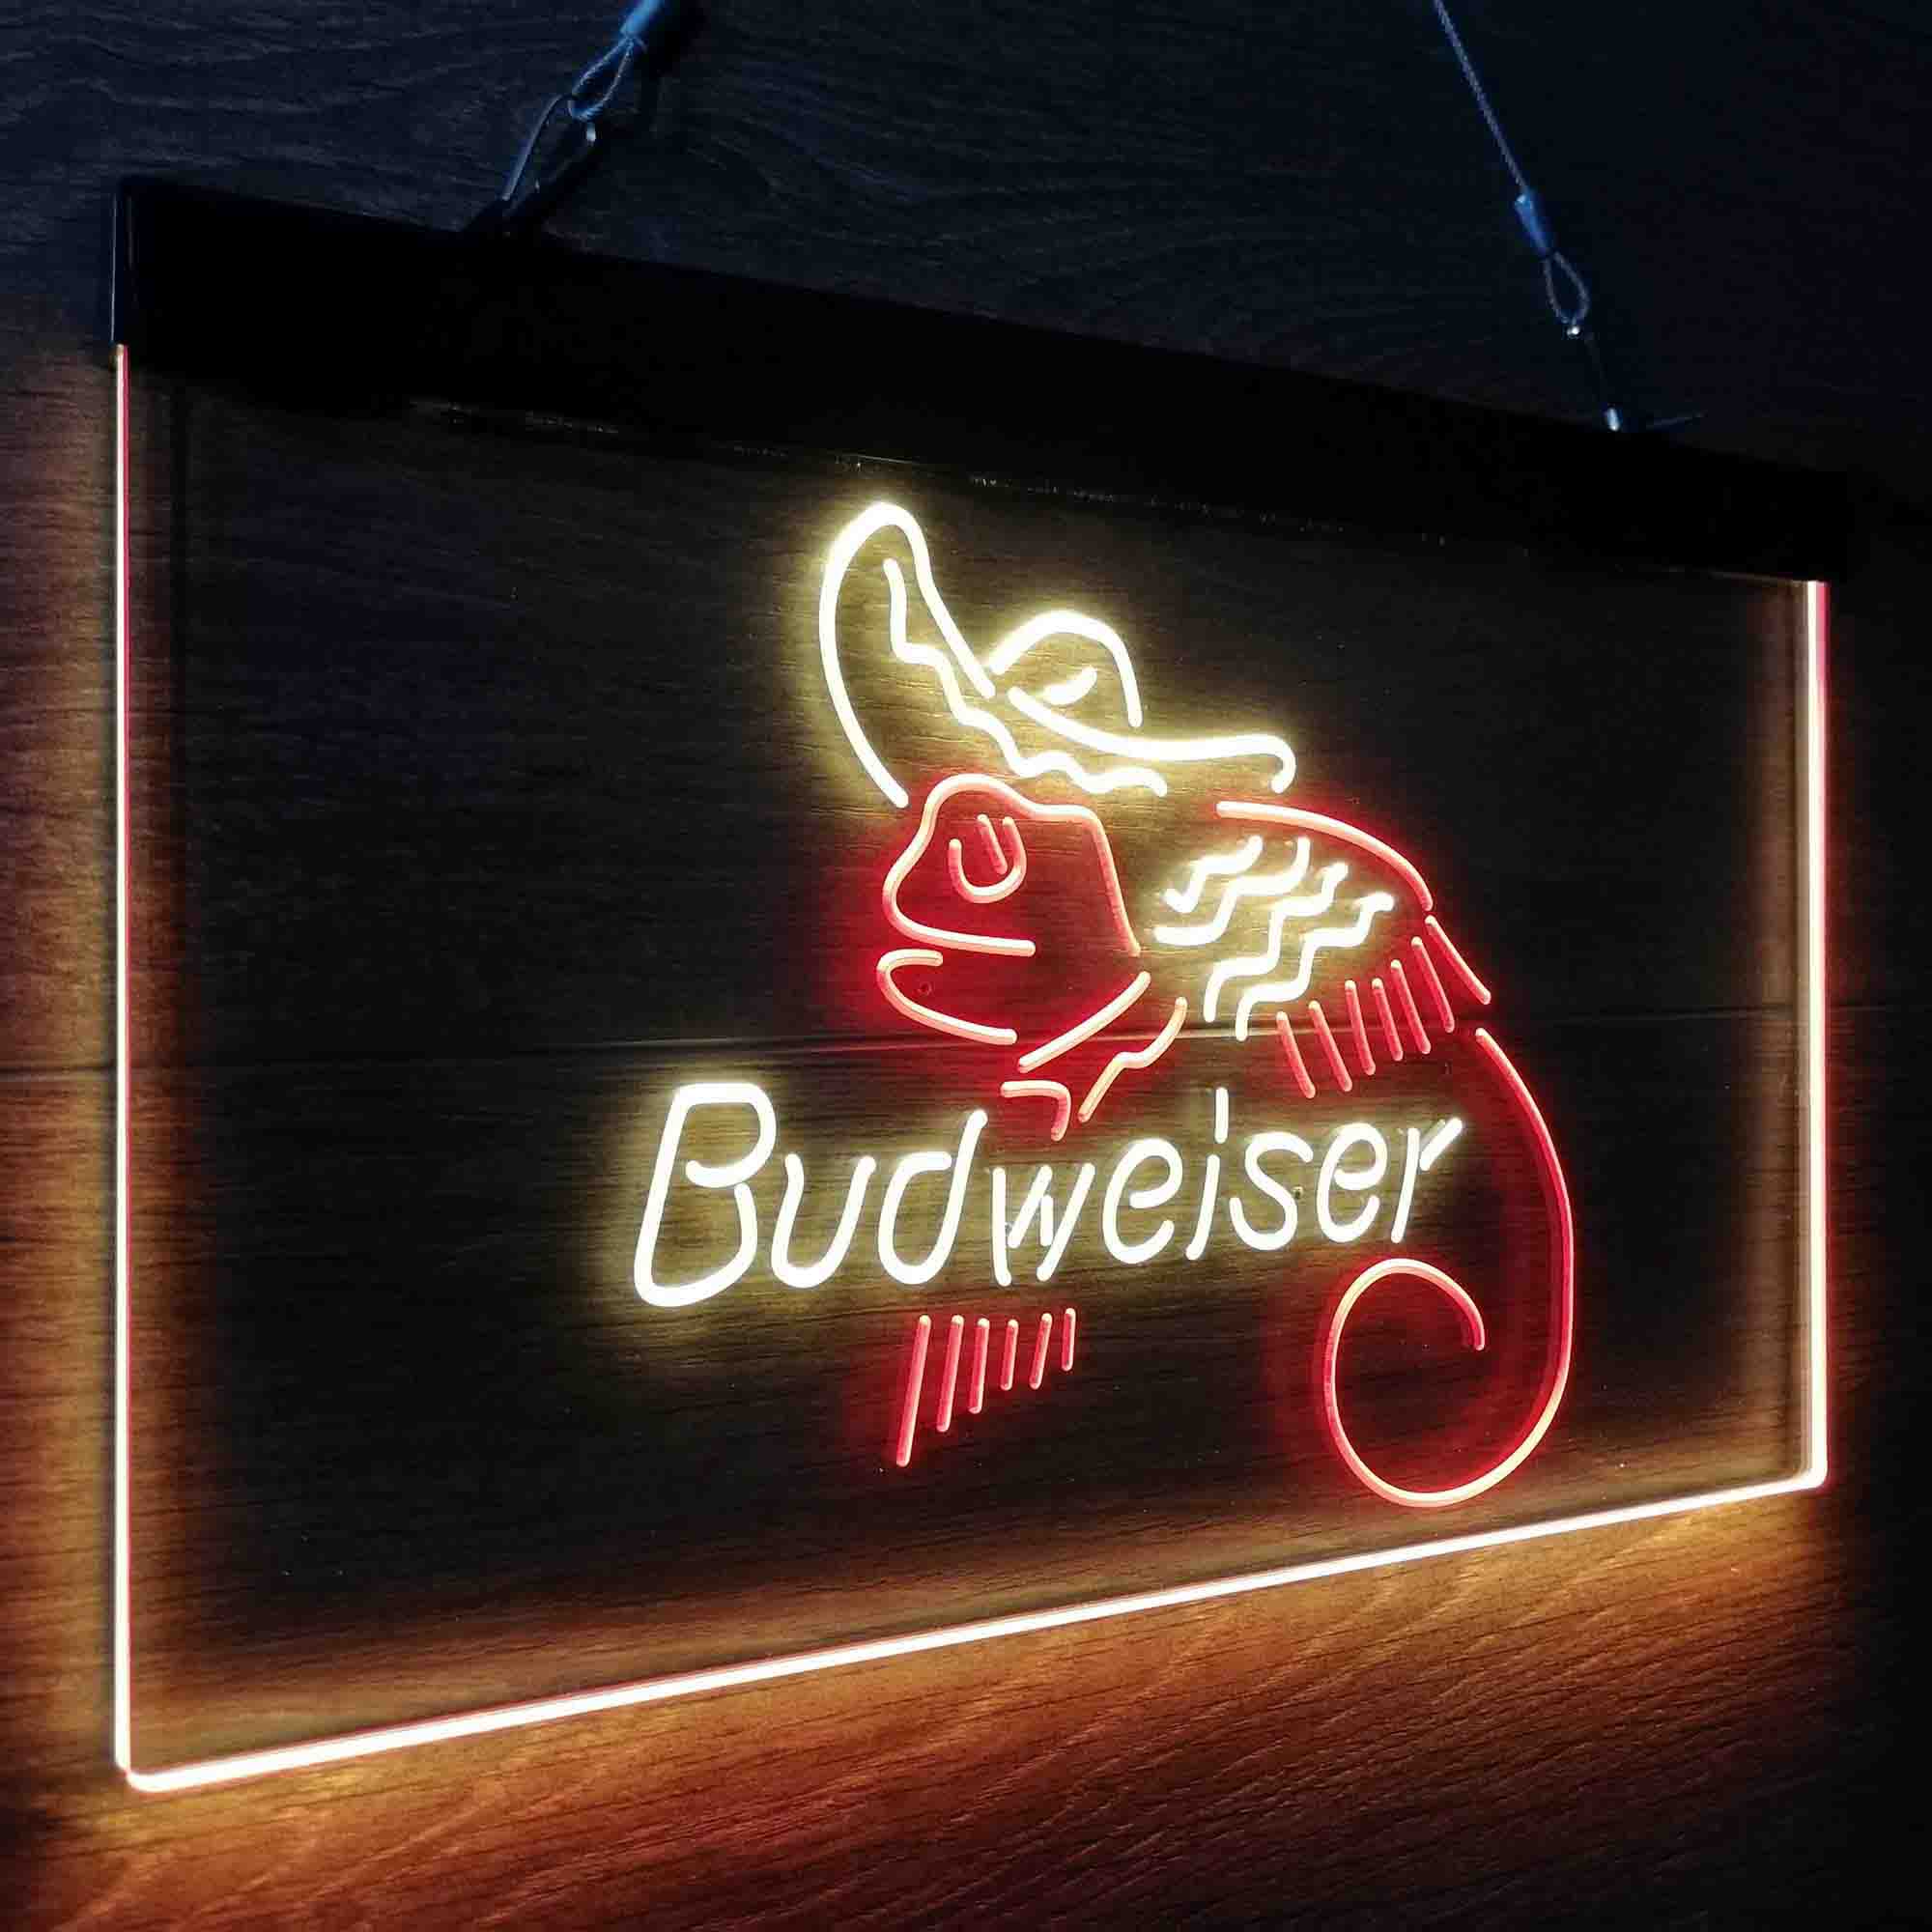 Budweiser Lizard Cowboys Mexico Neon-Like LED Sign - ProLedSign